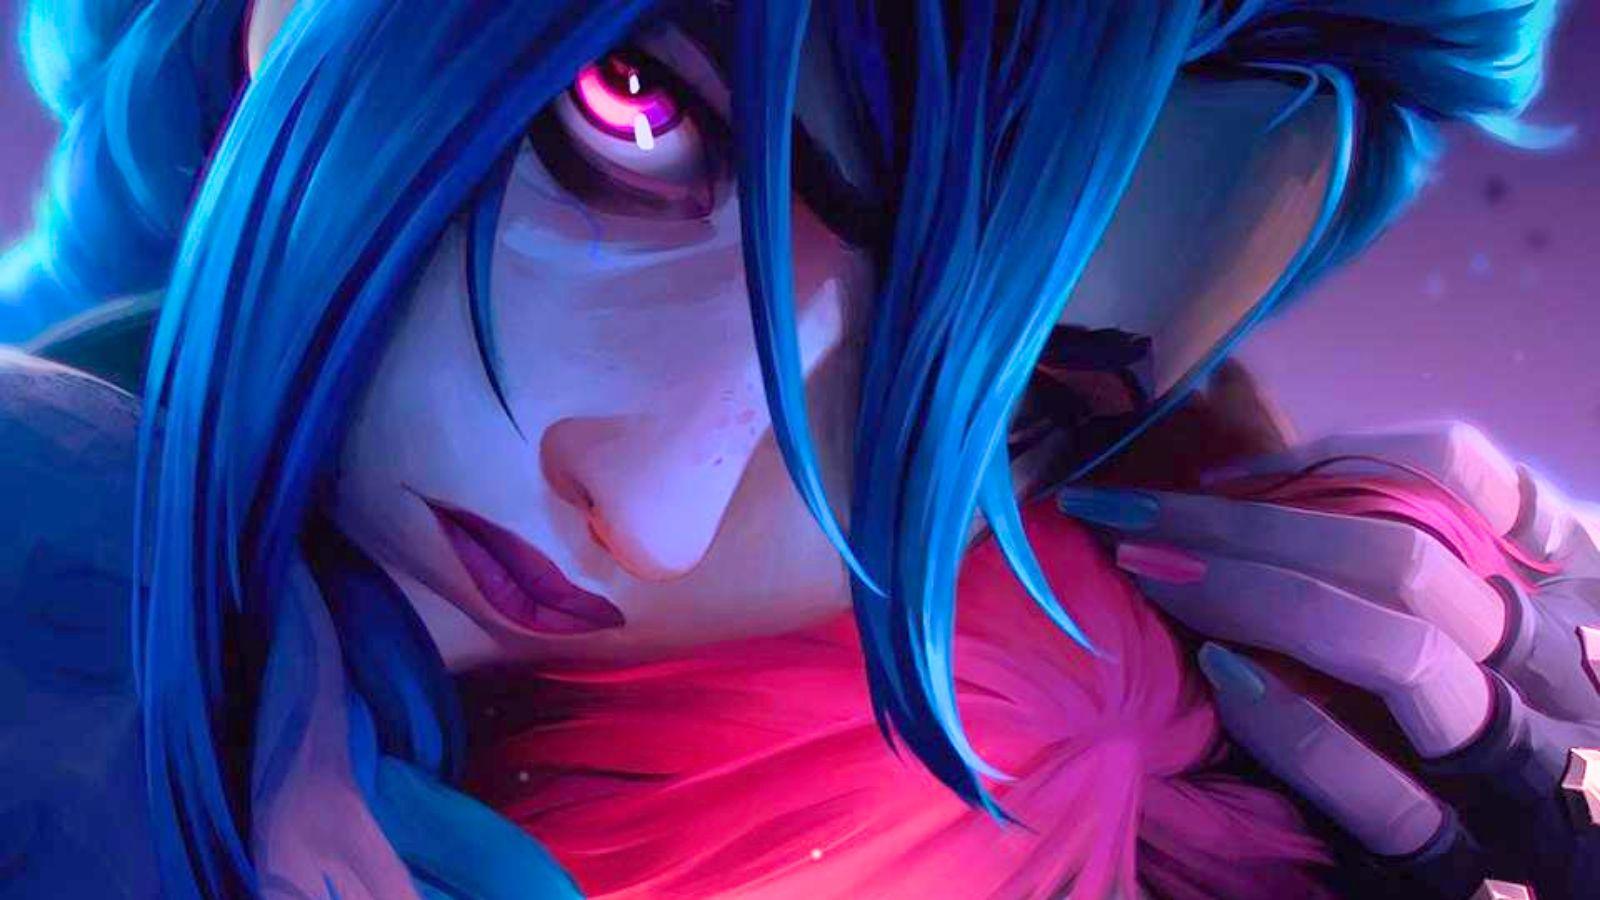 Jinx and Vi in the Arcane Season 2 poster.